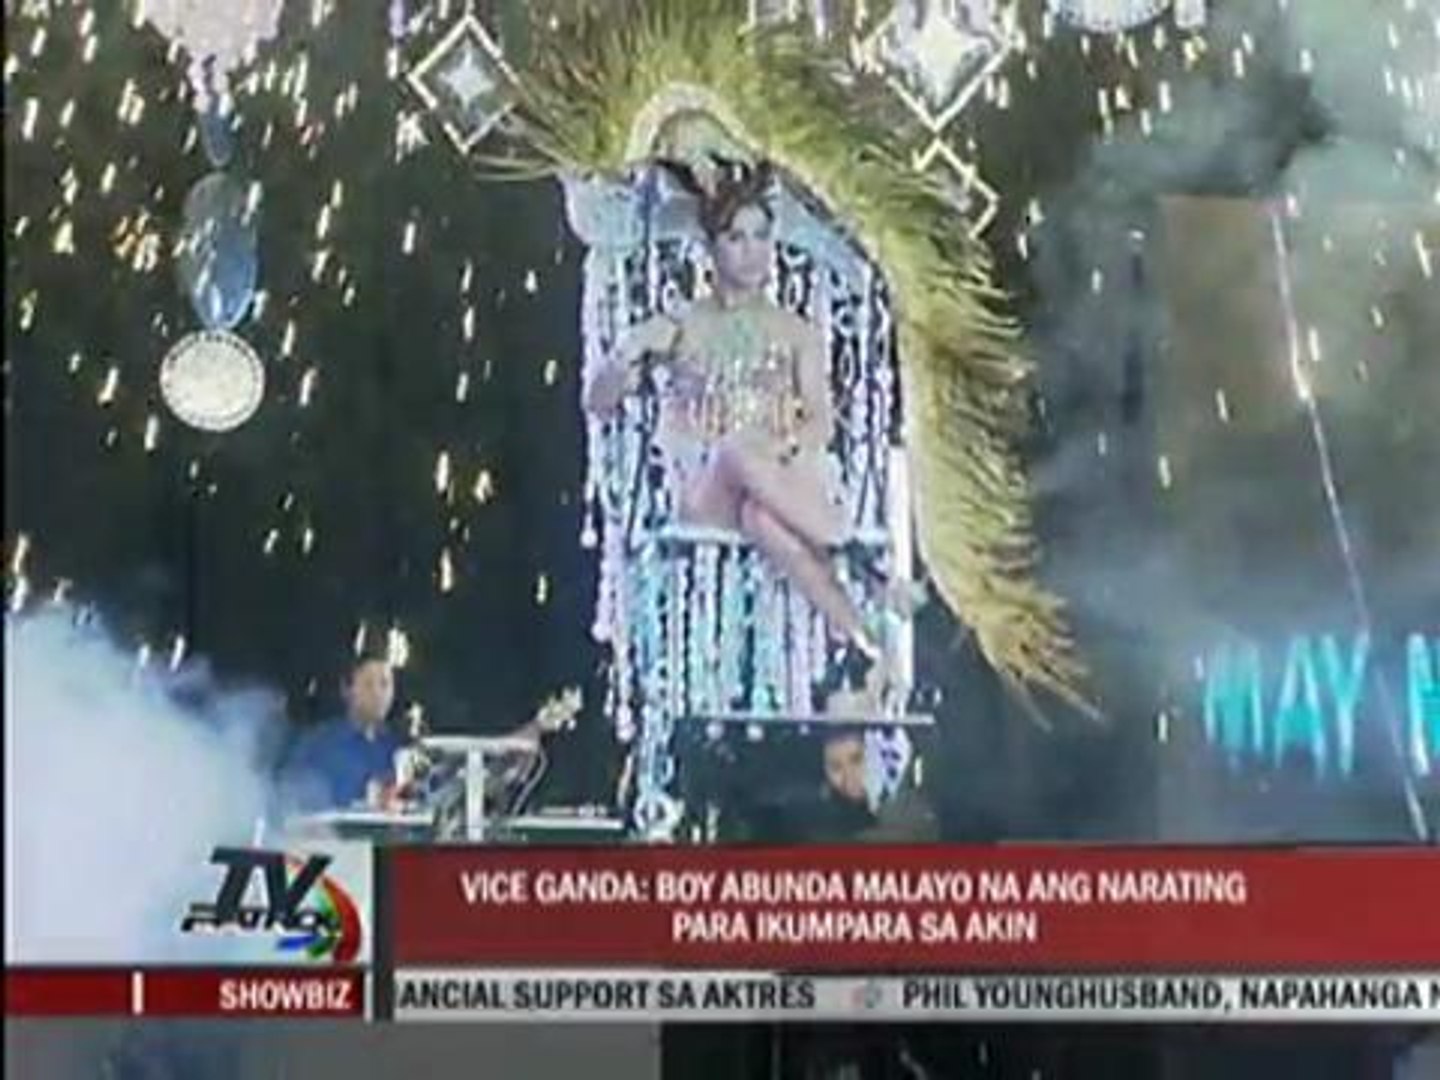 Vice Ganda to show off new stunt at concert